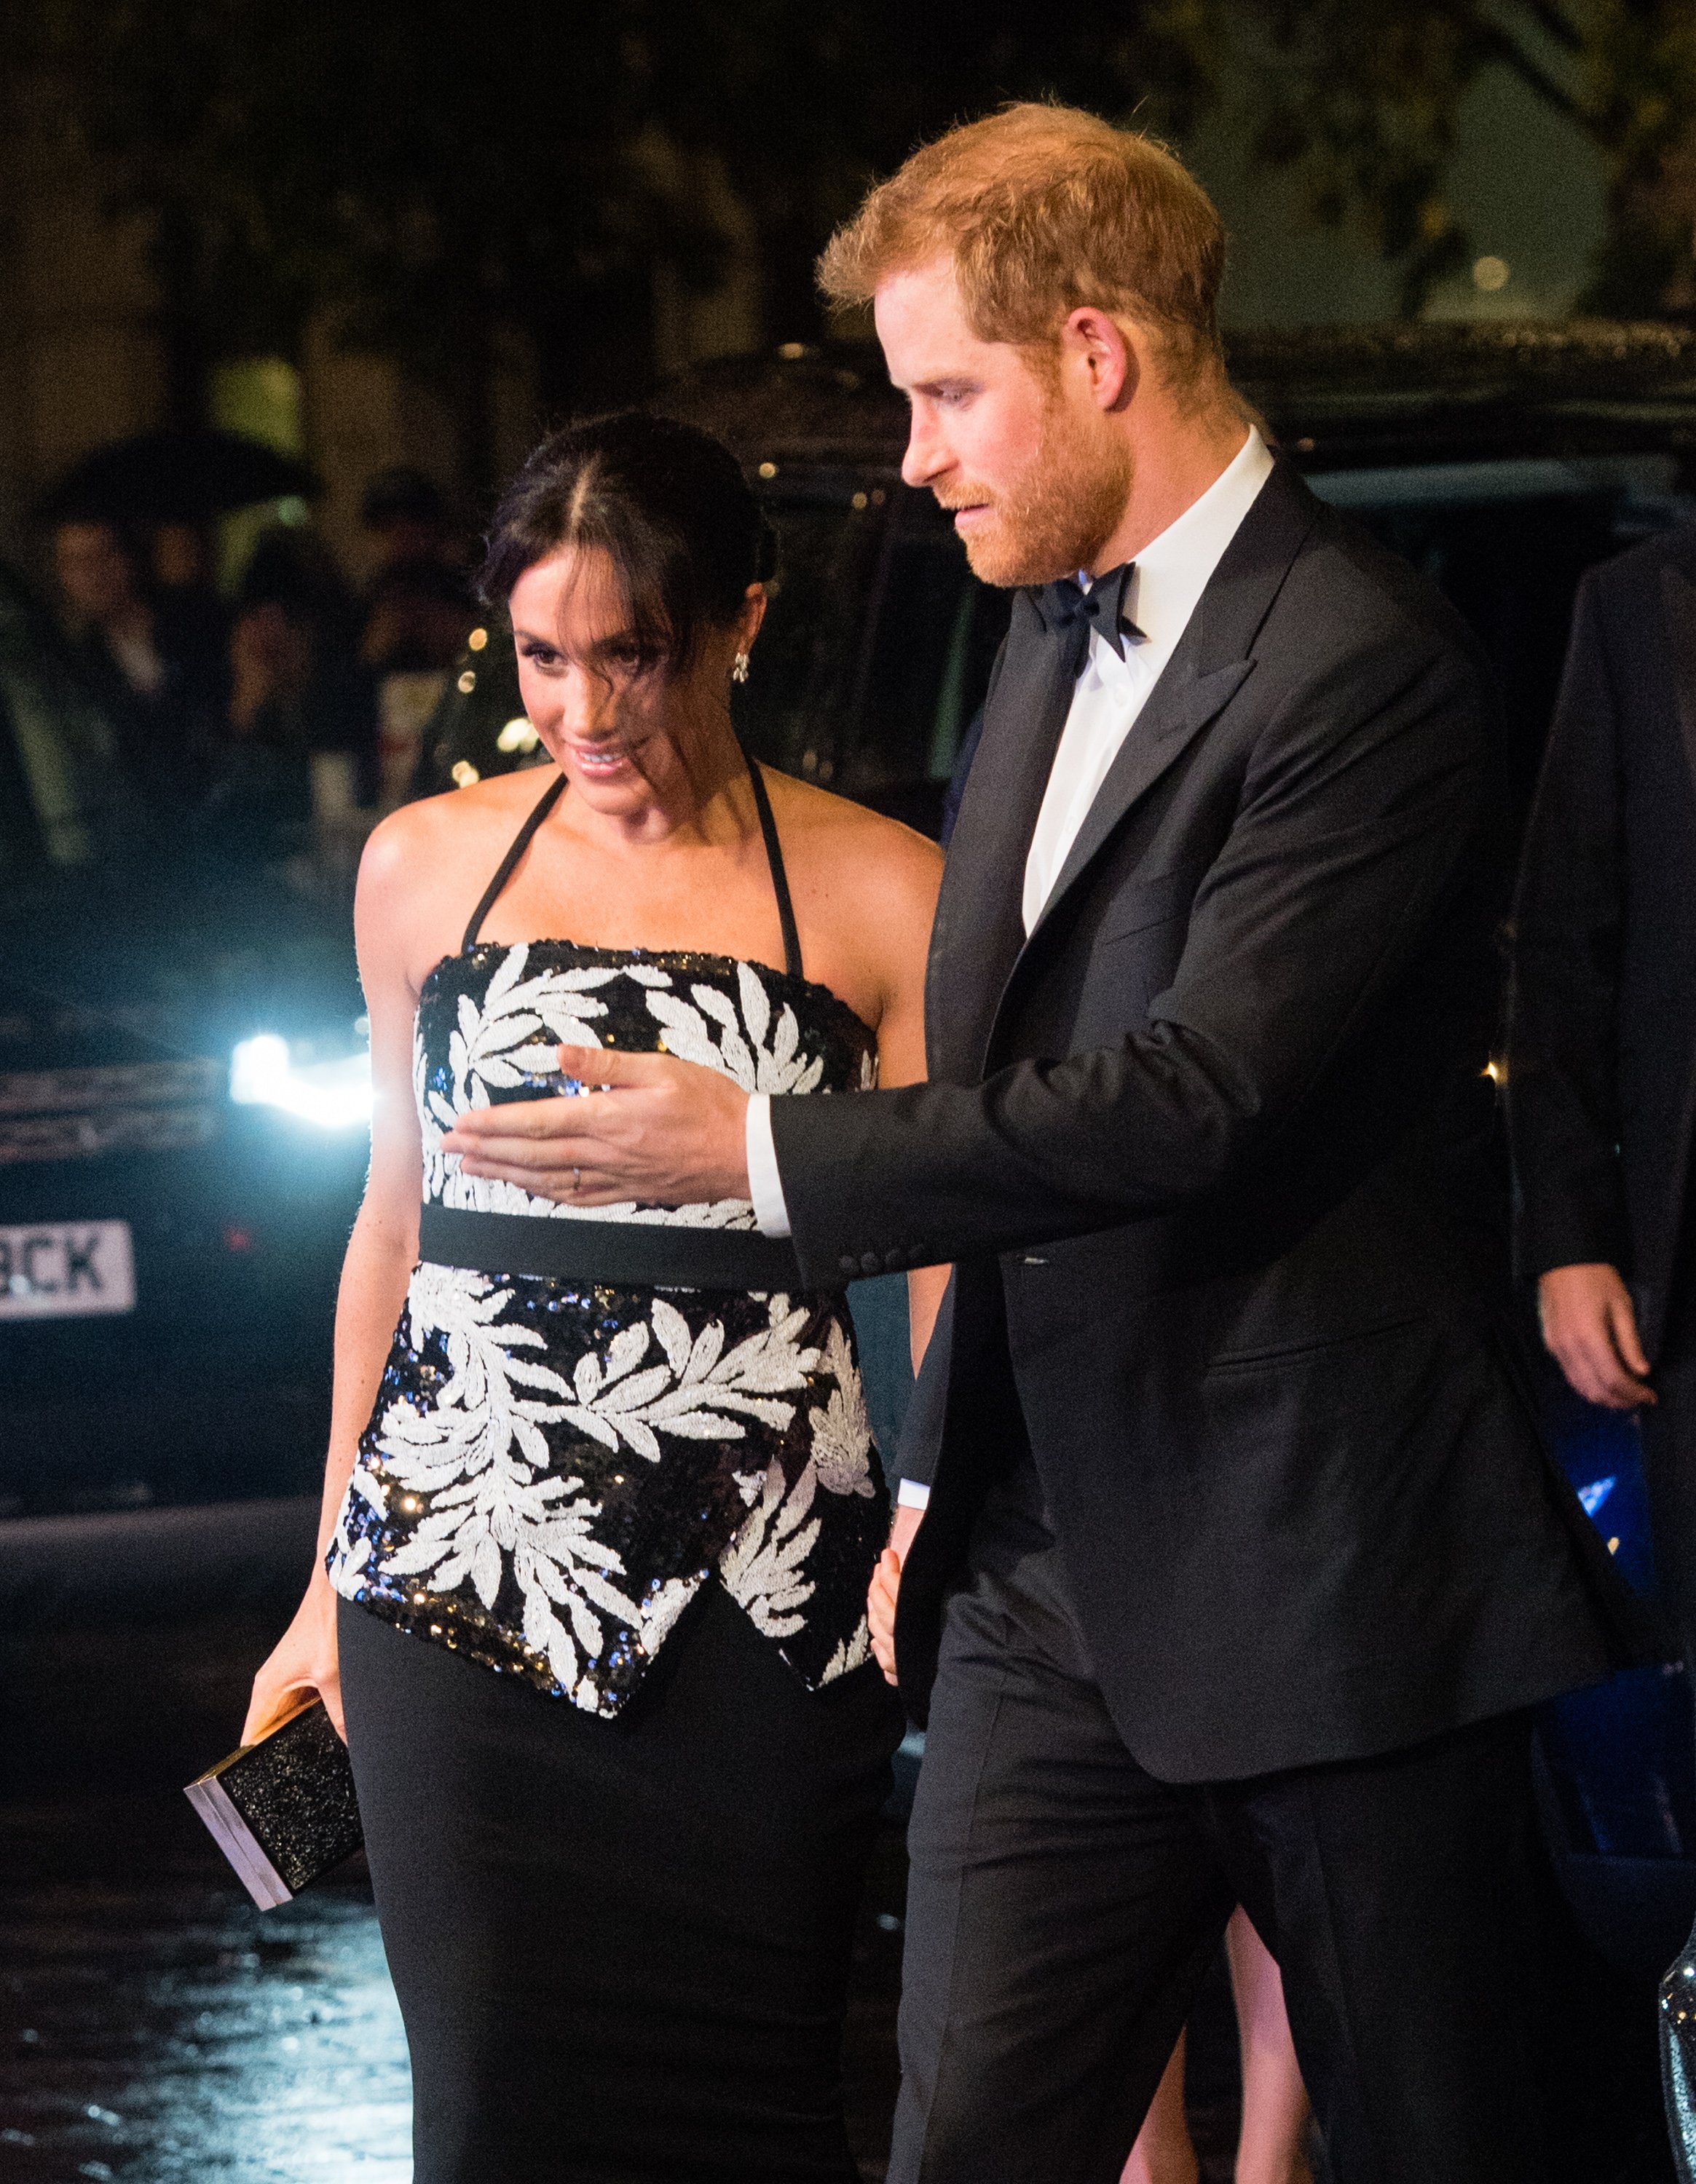 Prince Harry and Meghan Markle arriving together at The Royal Variety Performance in 2018